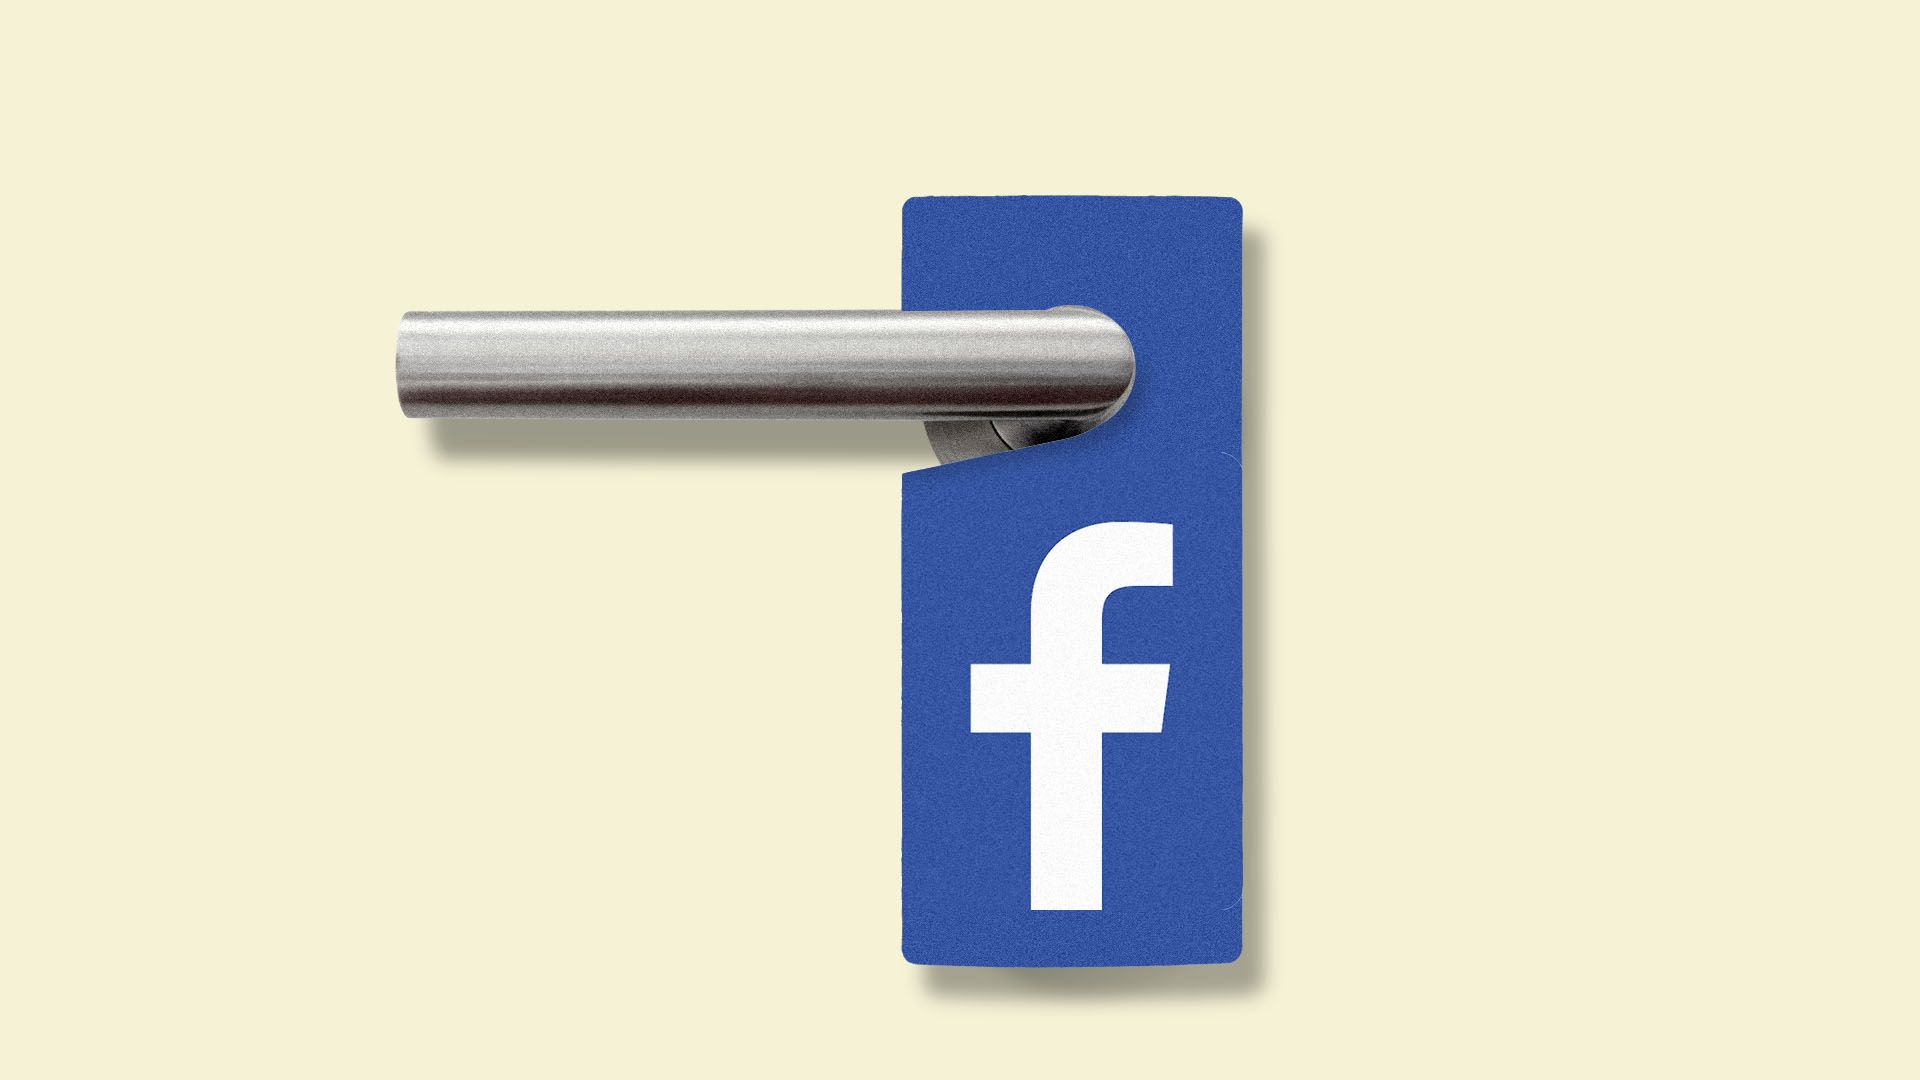 In this illustration, a "do not disturb" door handle sign has the Facebook logo on it 